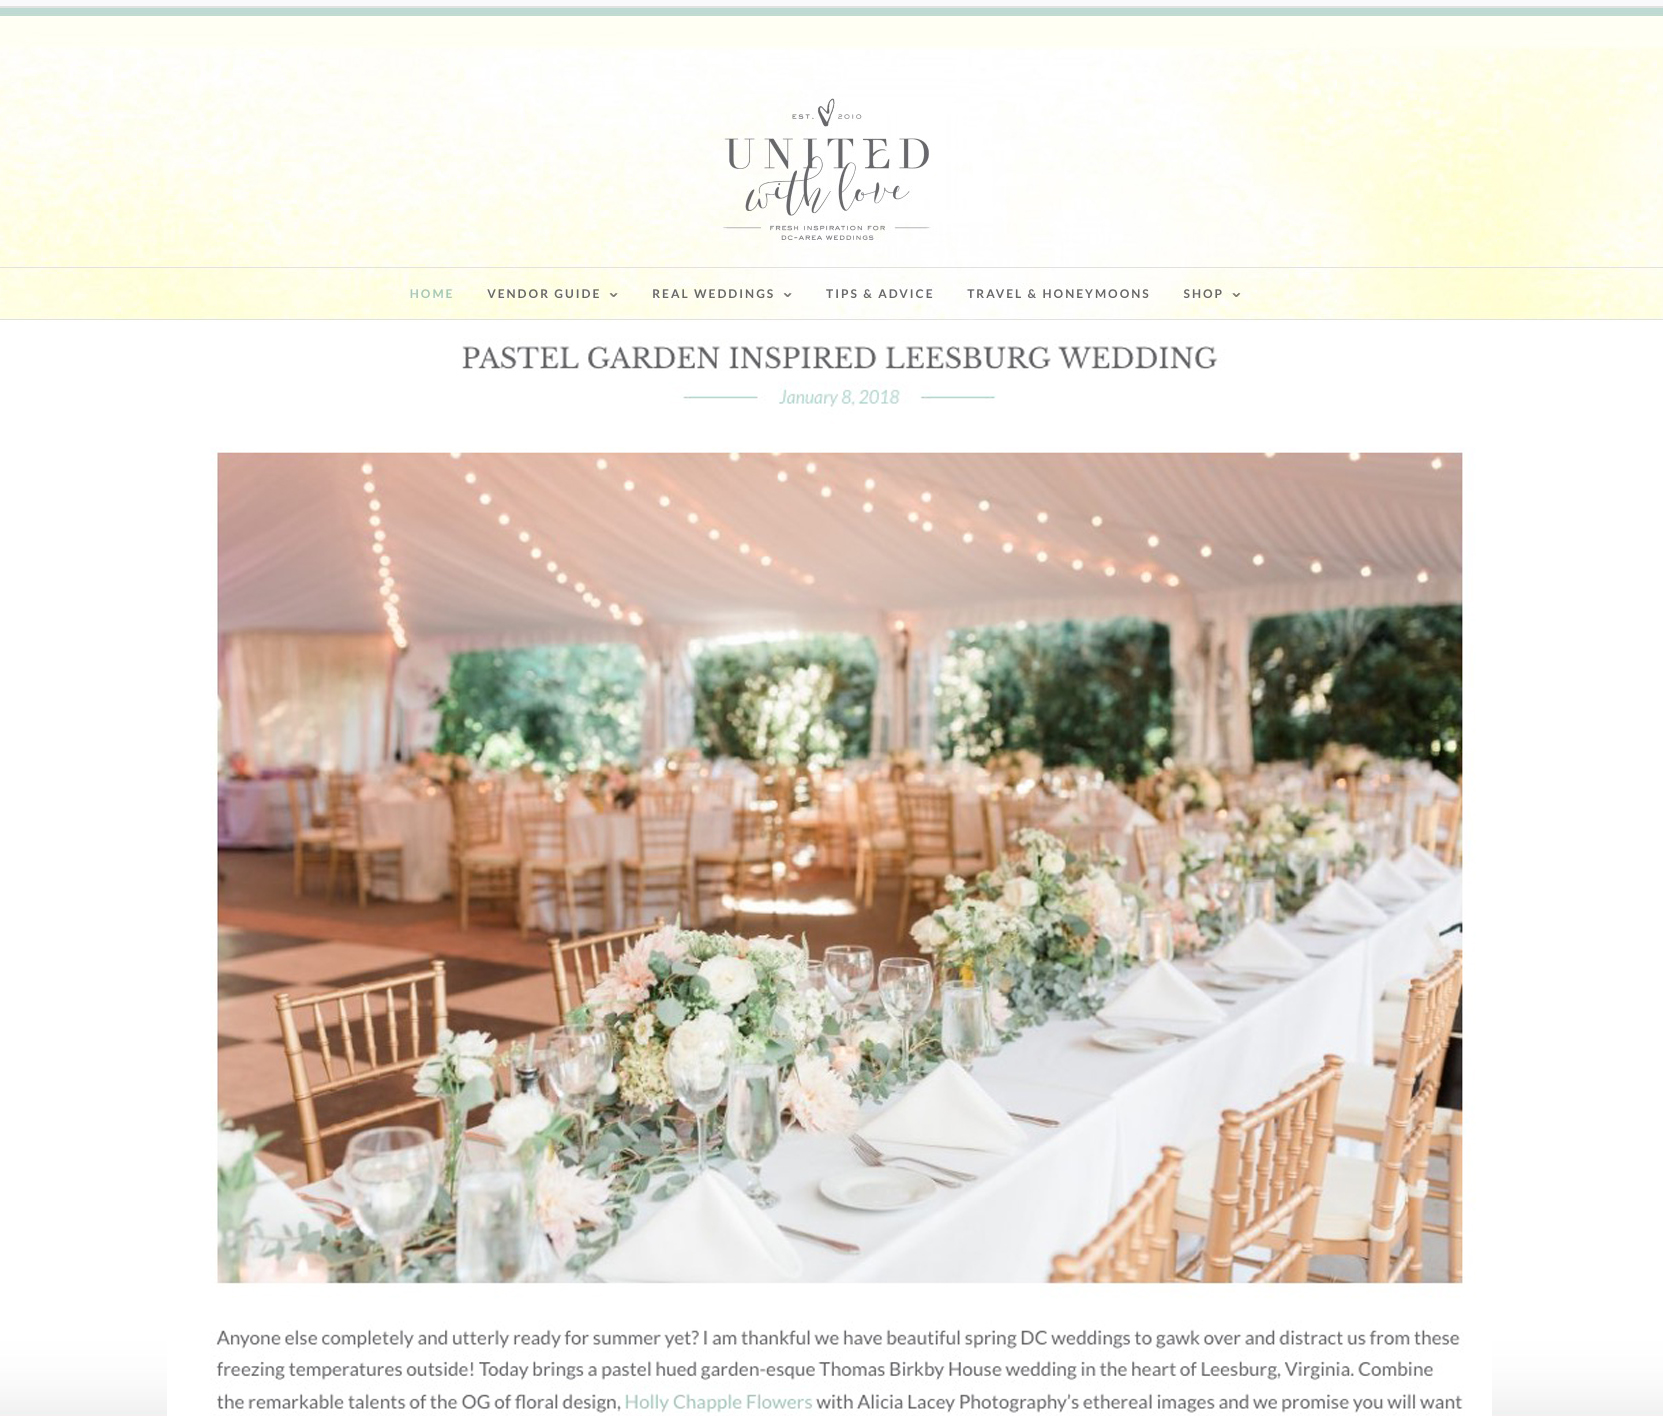 This Thomas Birkby House wedding that is complete with a pastel color palette and lush florals is featured on the Washington, DC blog, United with Love.